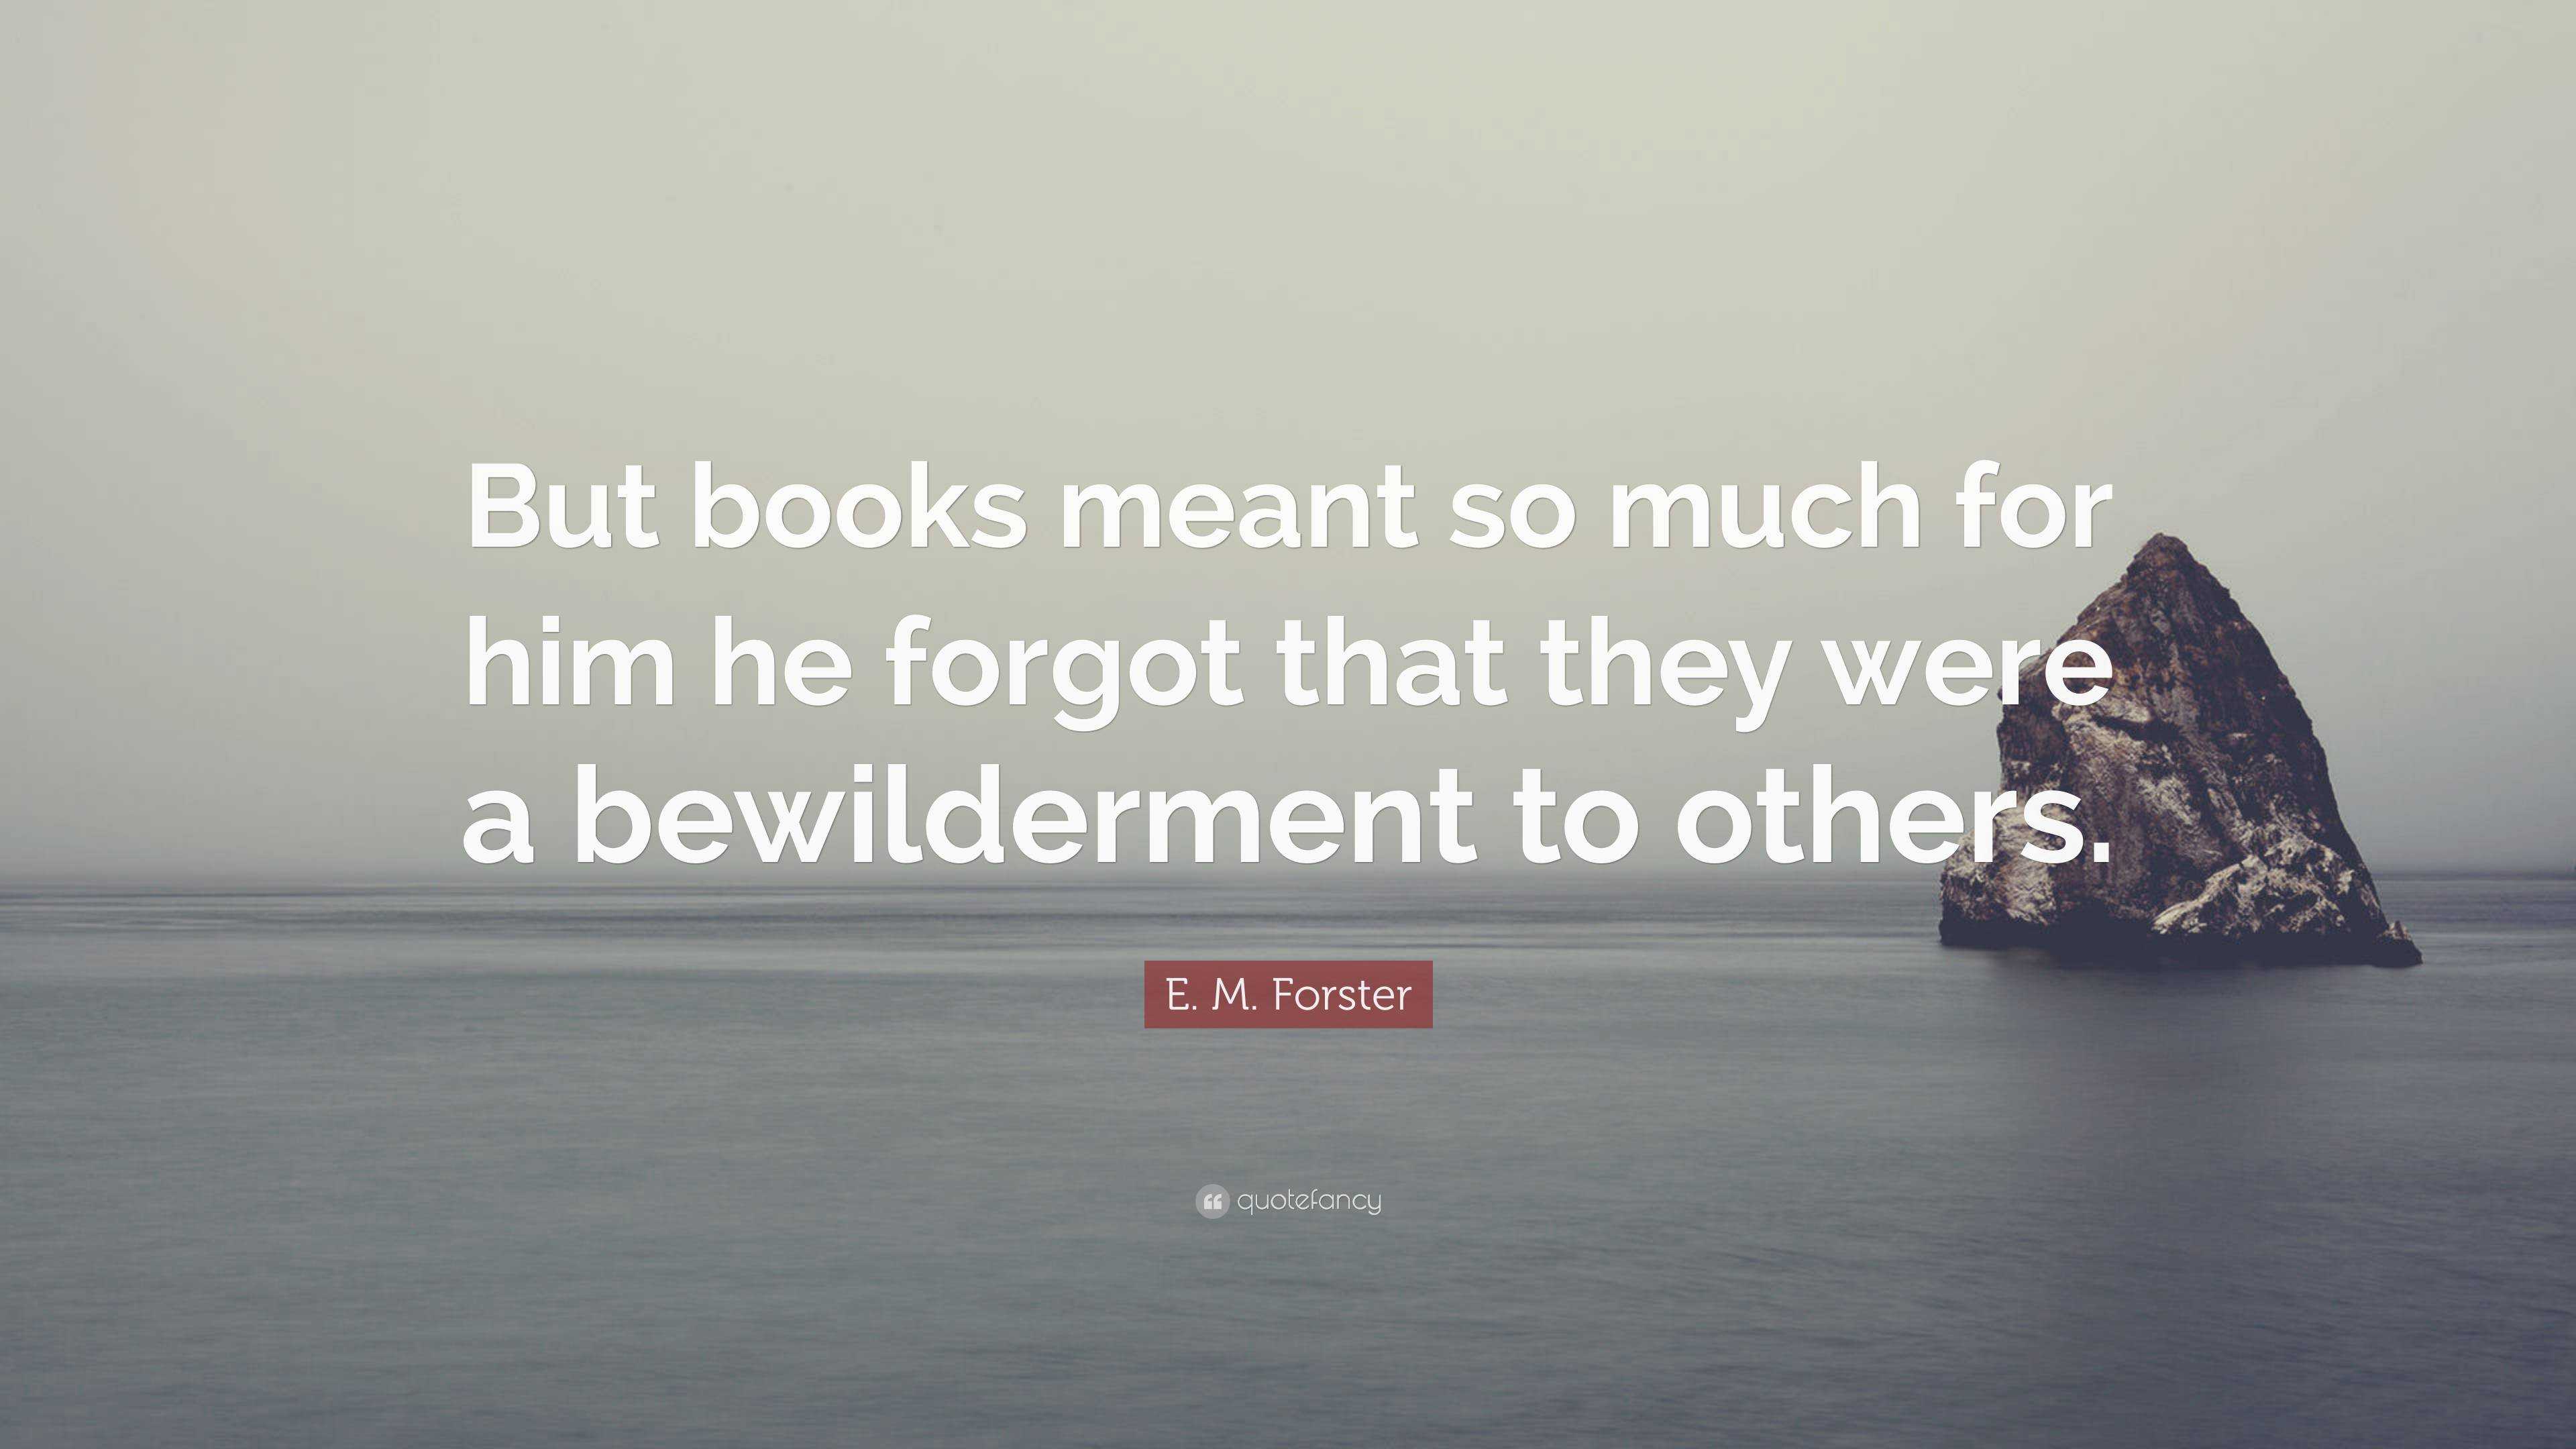 E. M. Forster Quote: “But books meant so much for him he forgot that ...